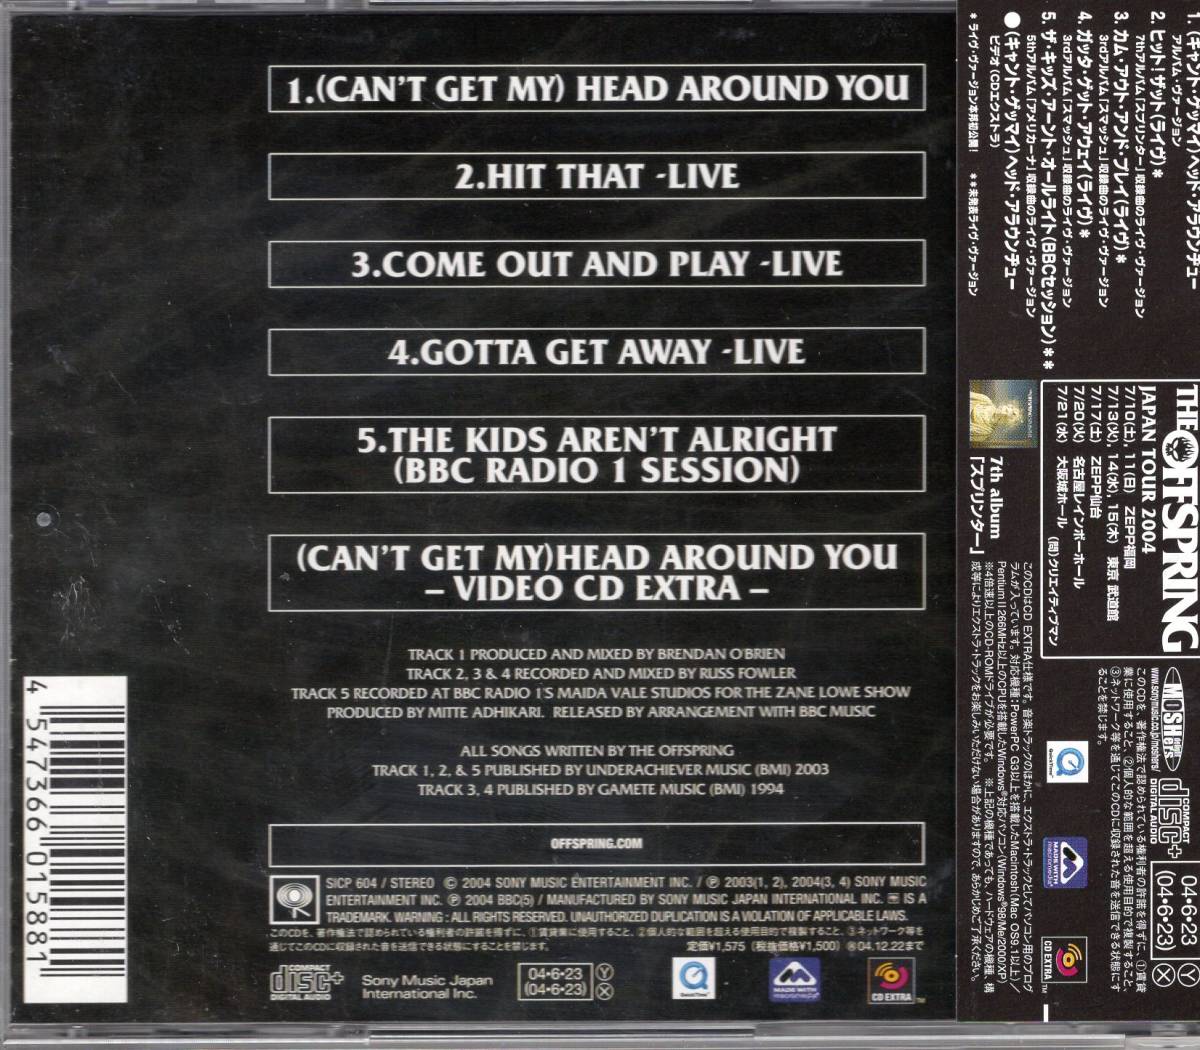 CD) オフスプリング　(CAN'T GET ME)HEAD AROUND YOU ミニアルバム_画像2